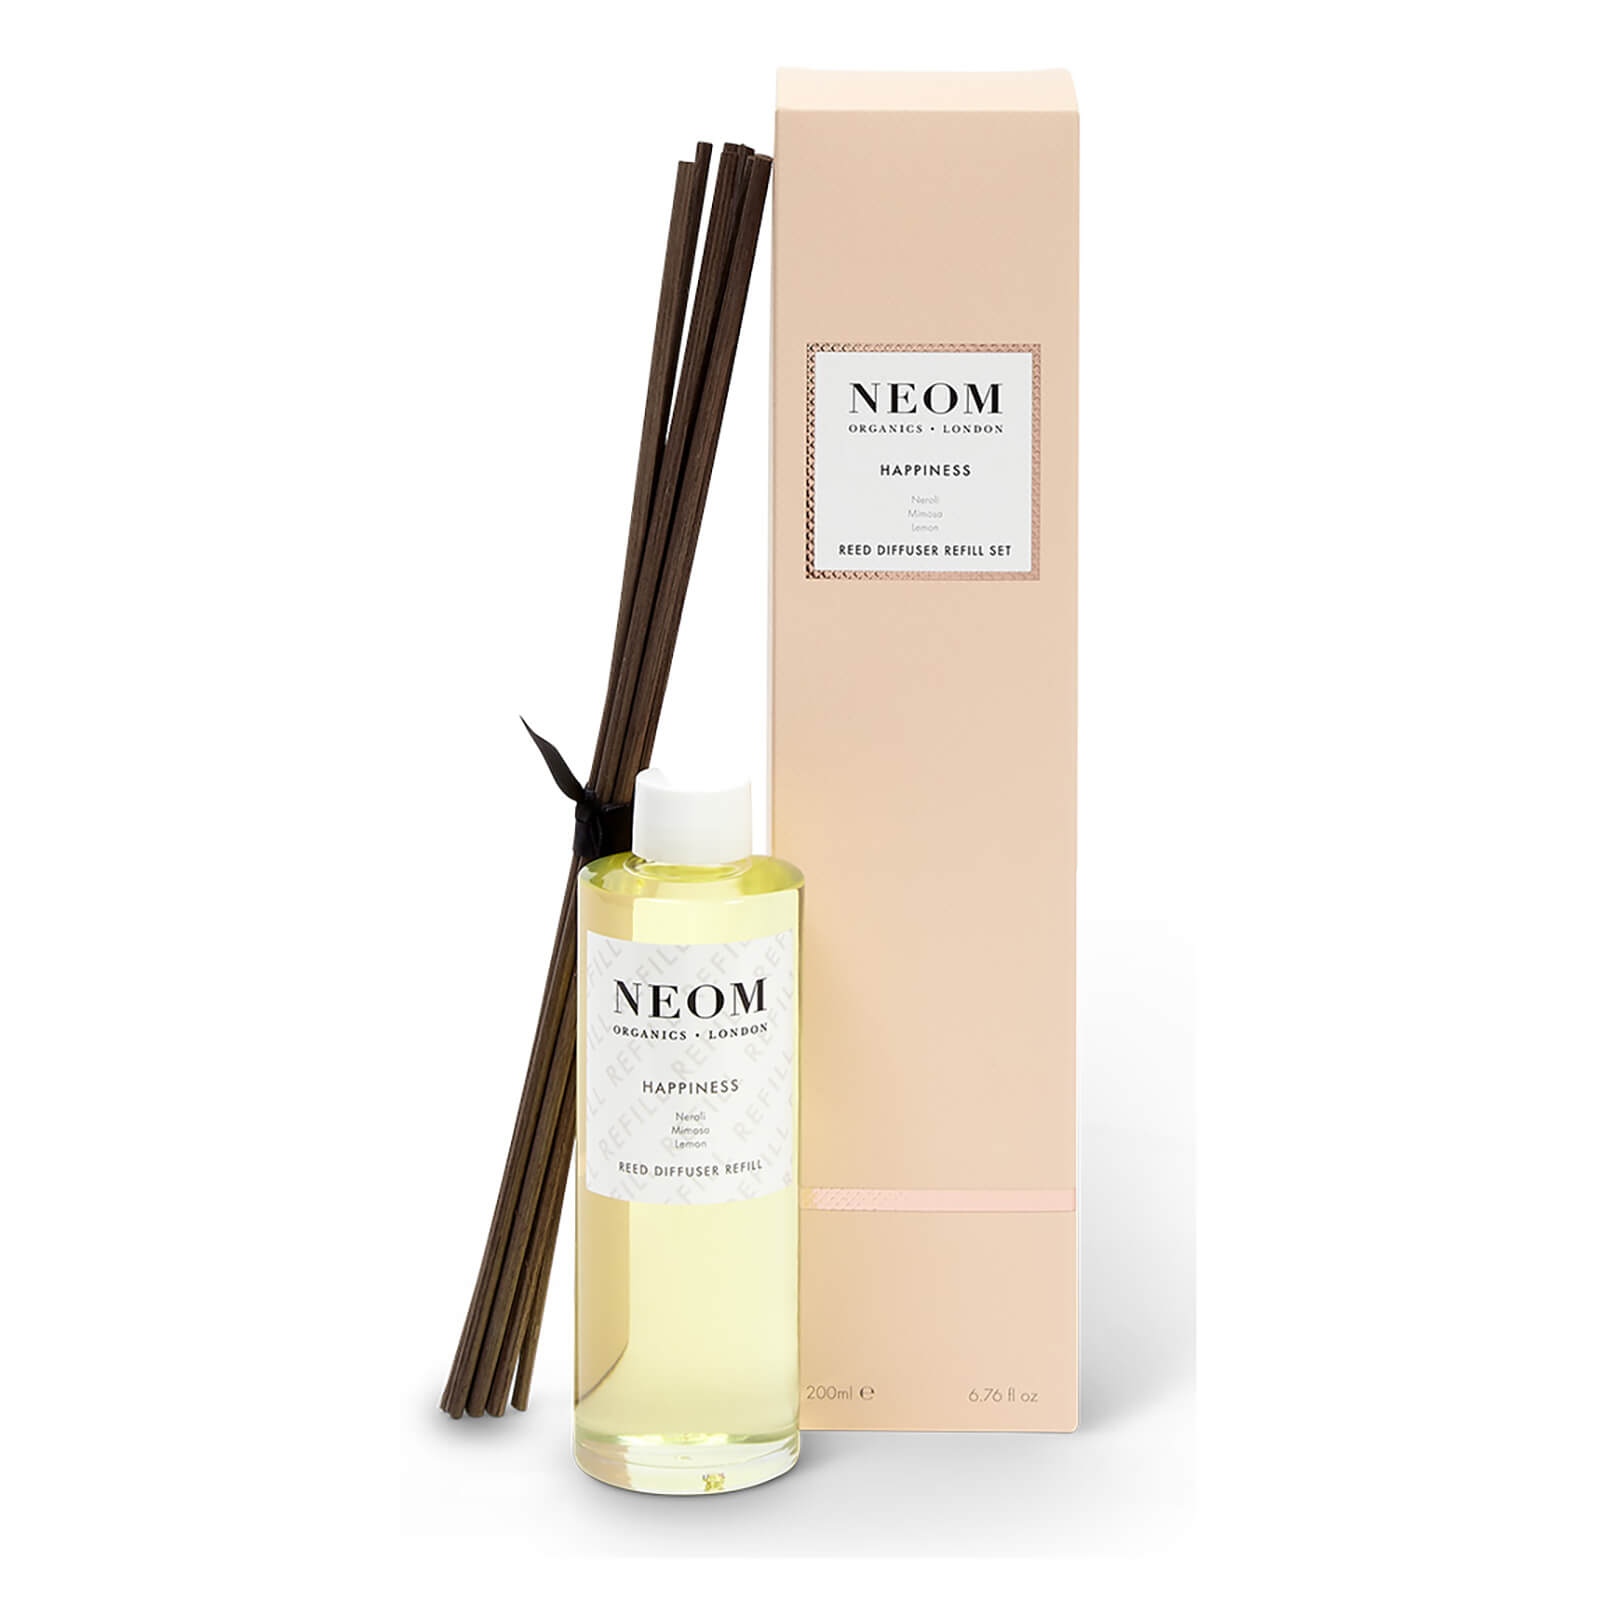 NEOM Organics London Happiness Ultimate Reed Diffuser Refill